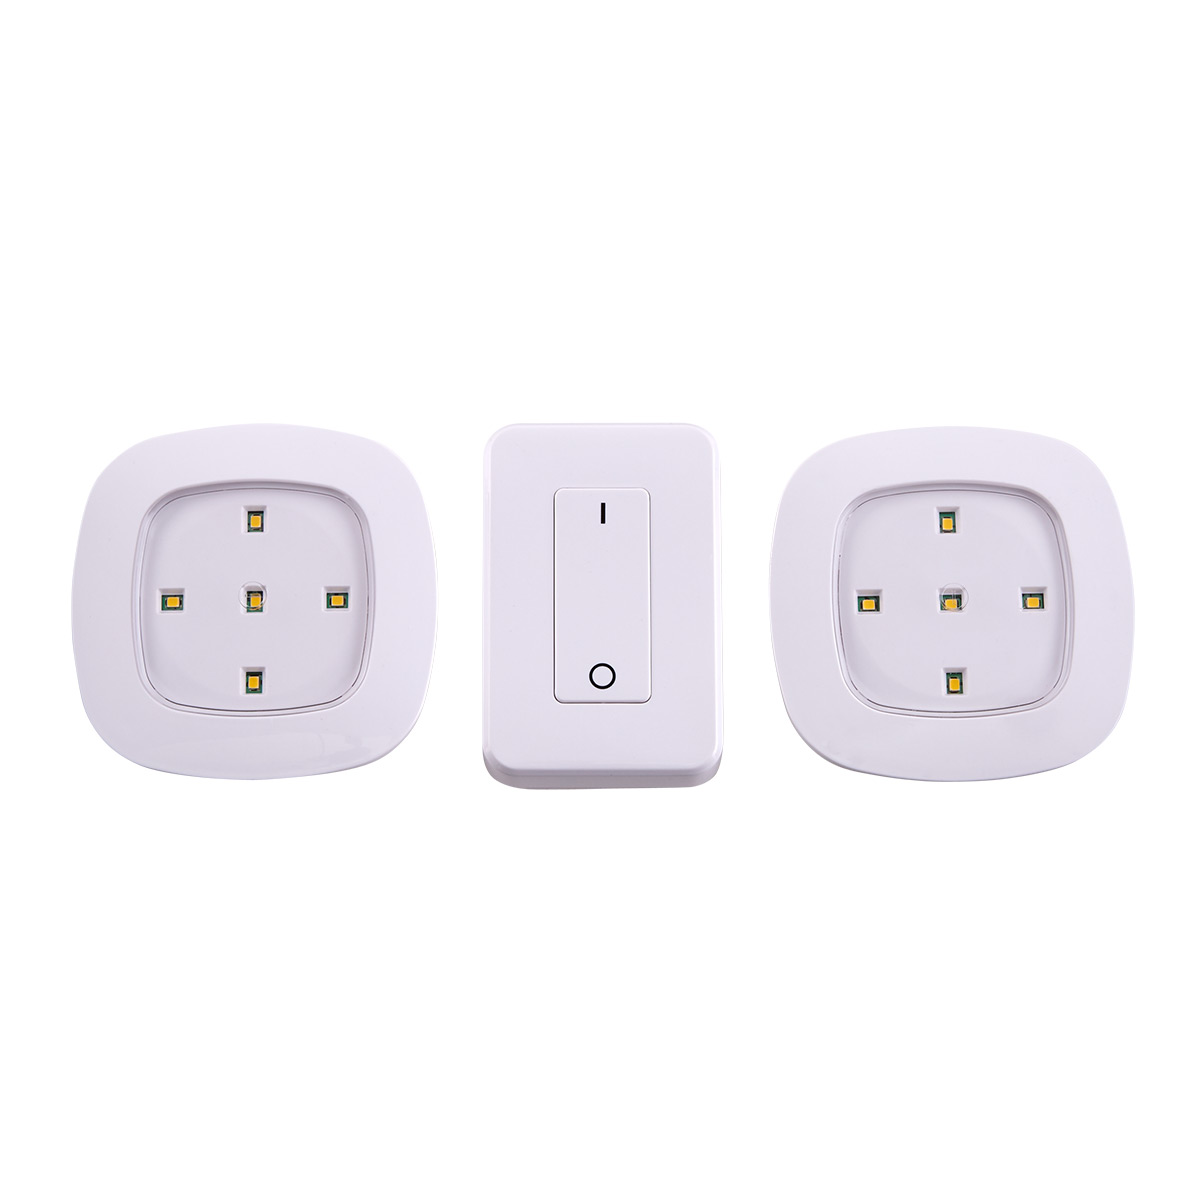 https://www.containerstore.com/catalogimages/356791/10076419-wireless-5-led-control-ligh.jpg